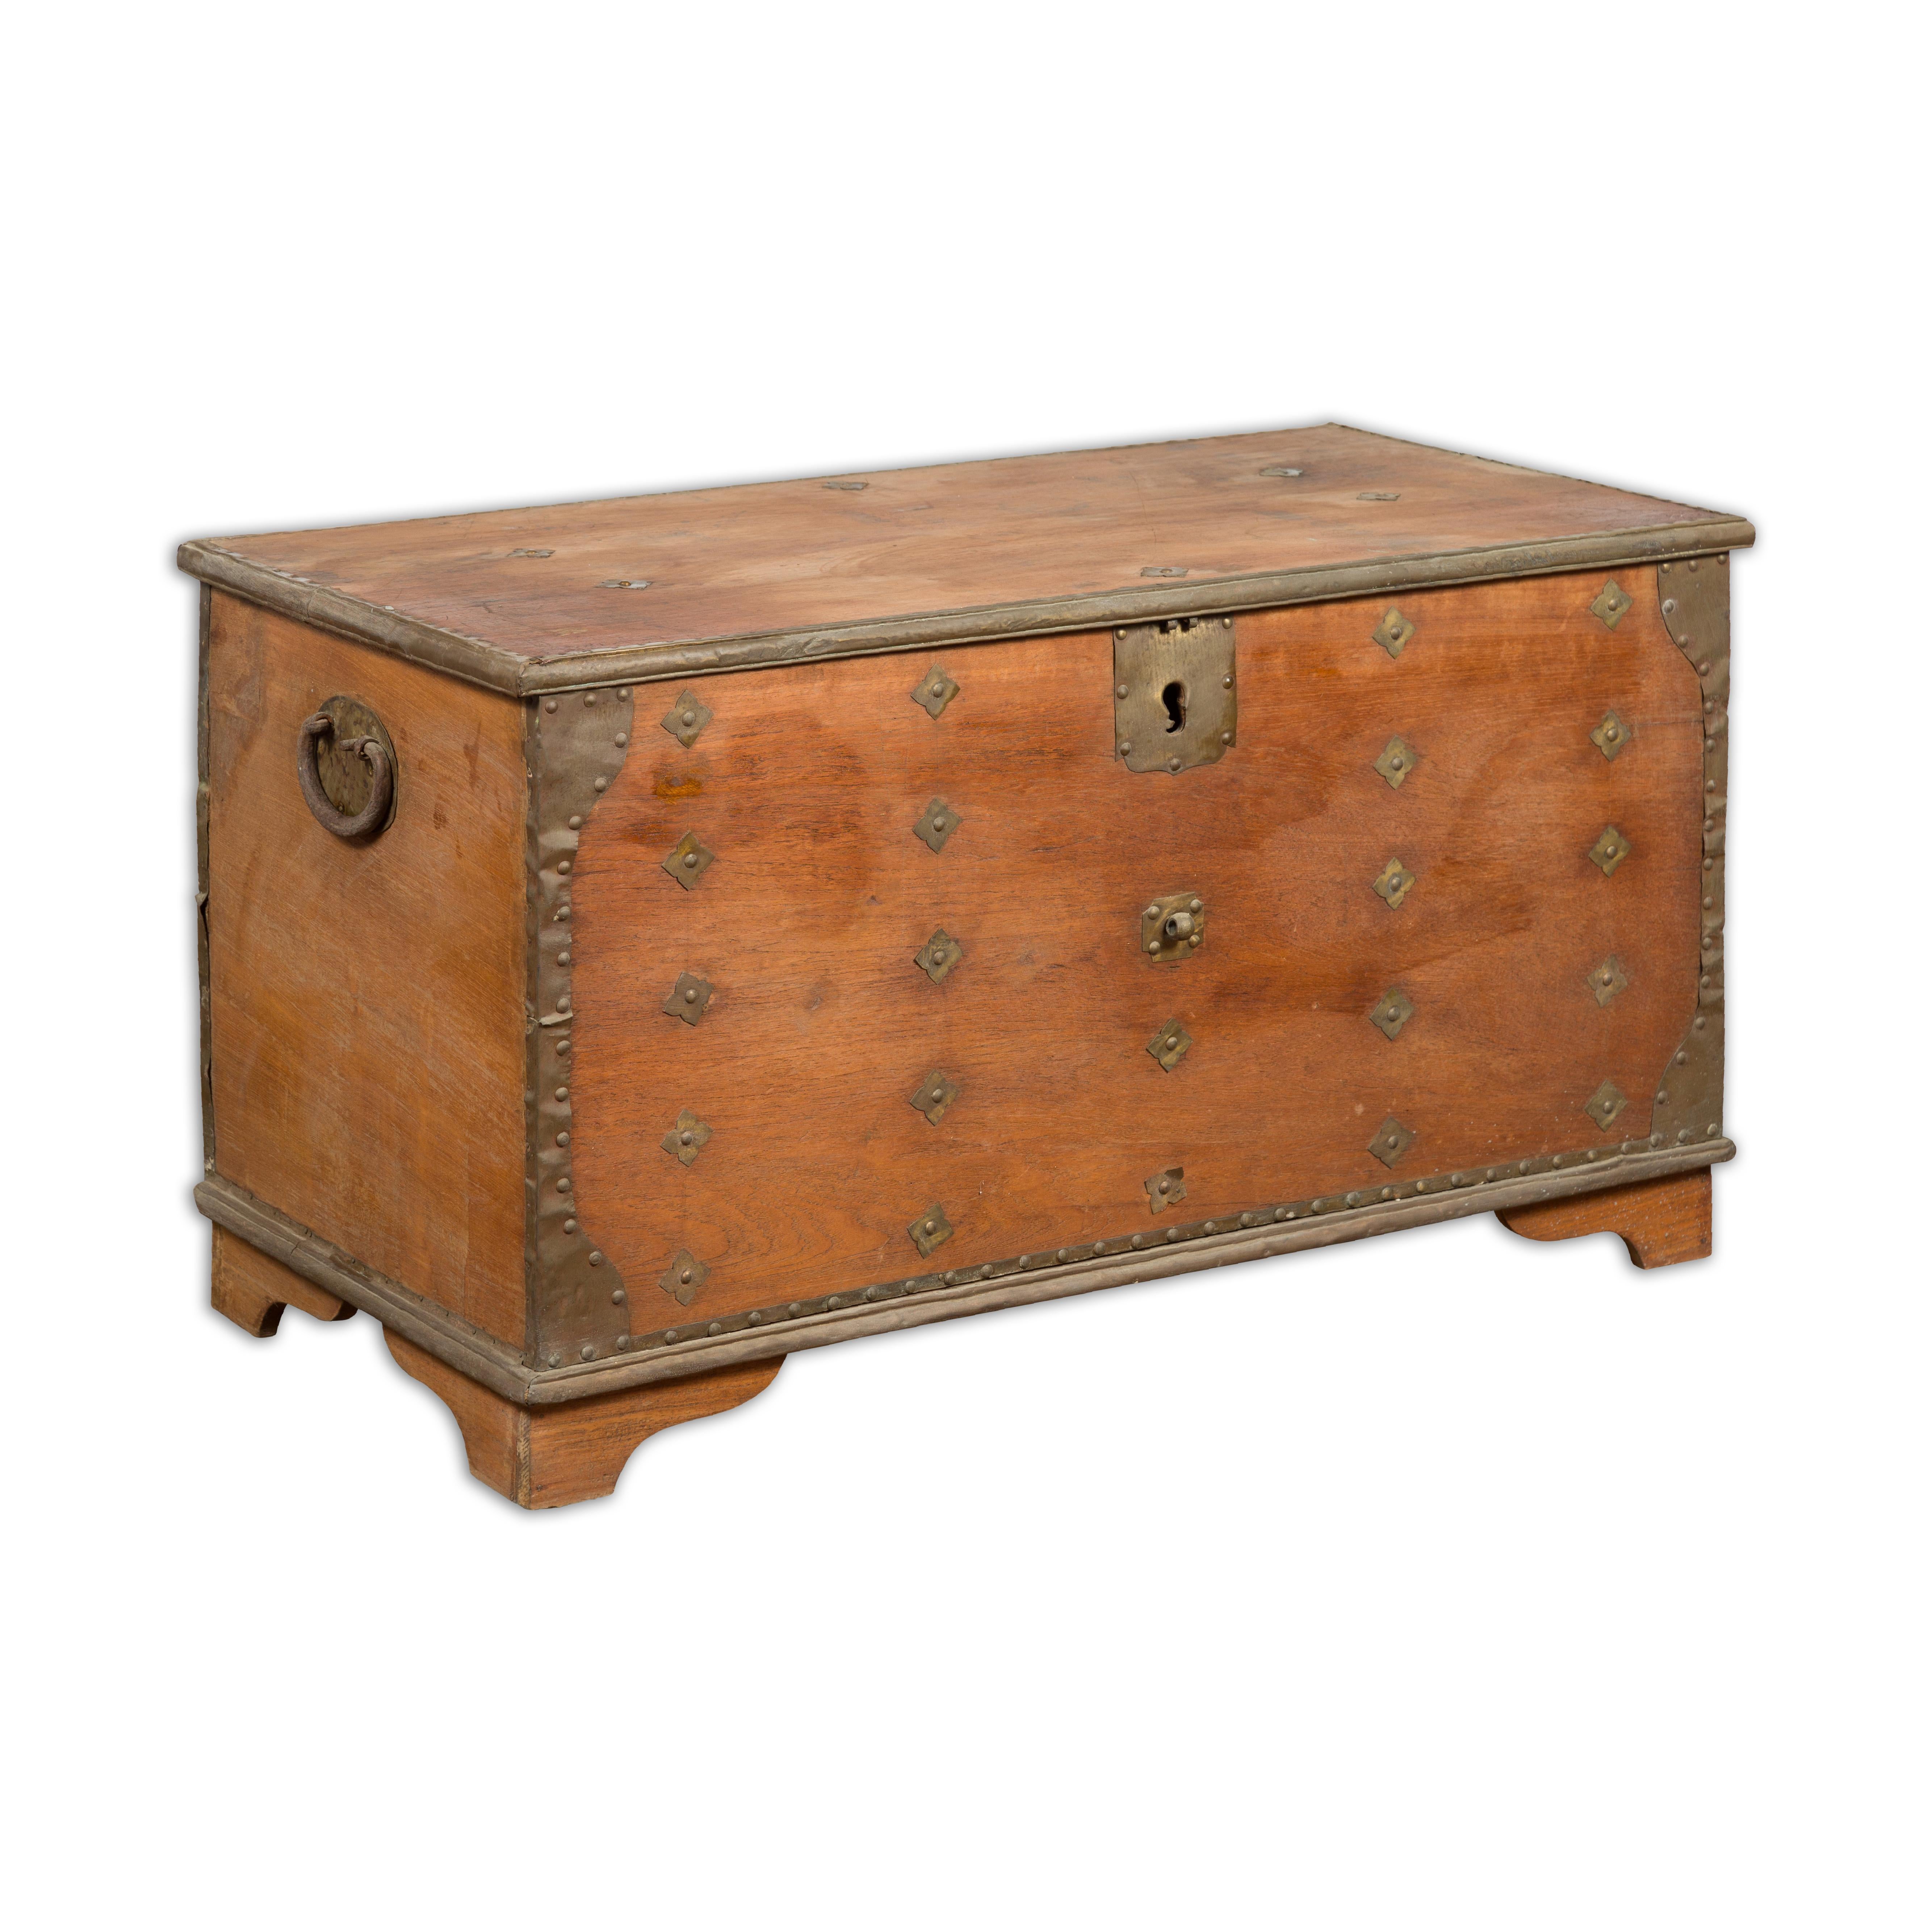 Rustic Indonesian 19th Century Wooden Blanket Chest with Brass Accents For Sale 17